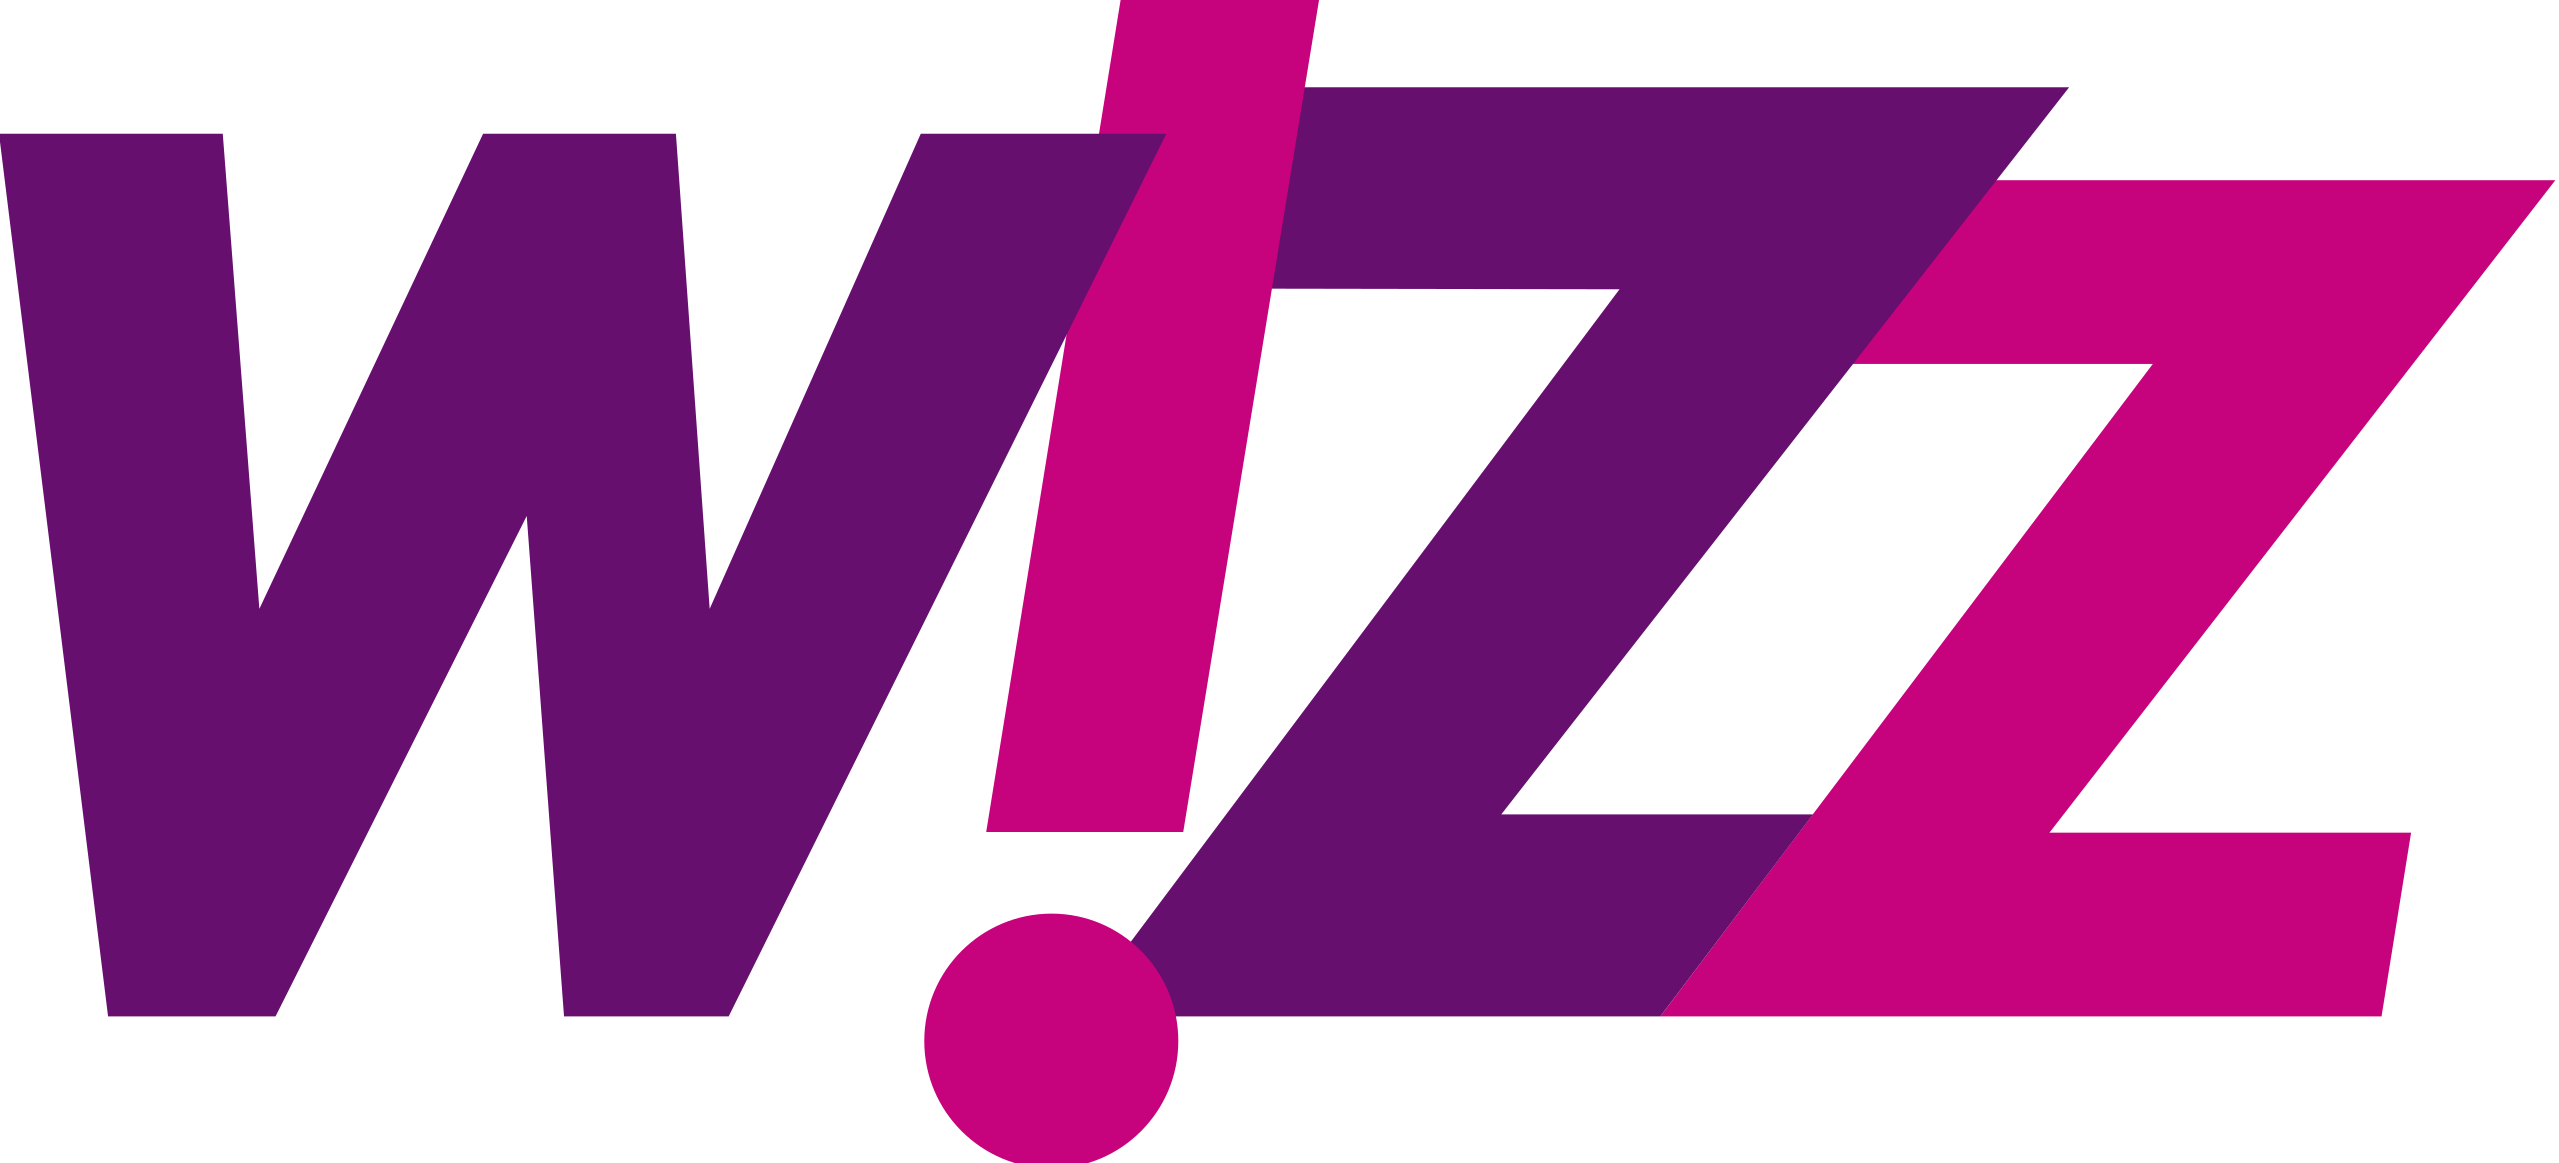 cropped cropped cropped Wizz Air logo.svg  1